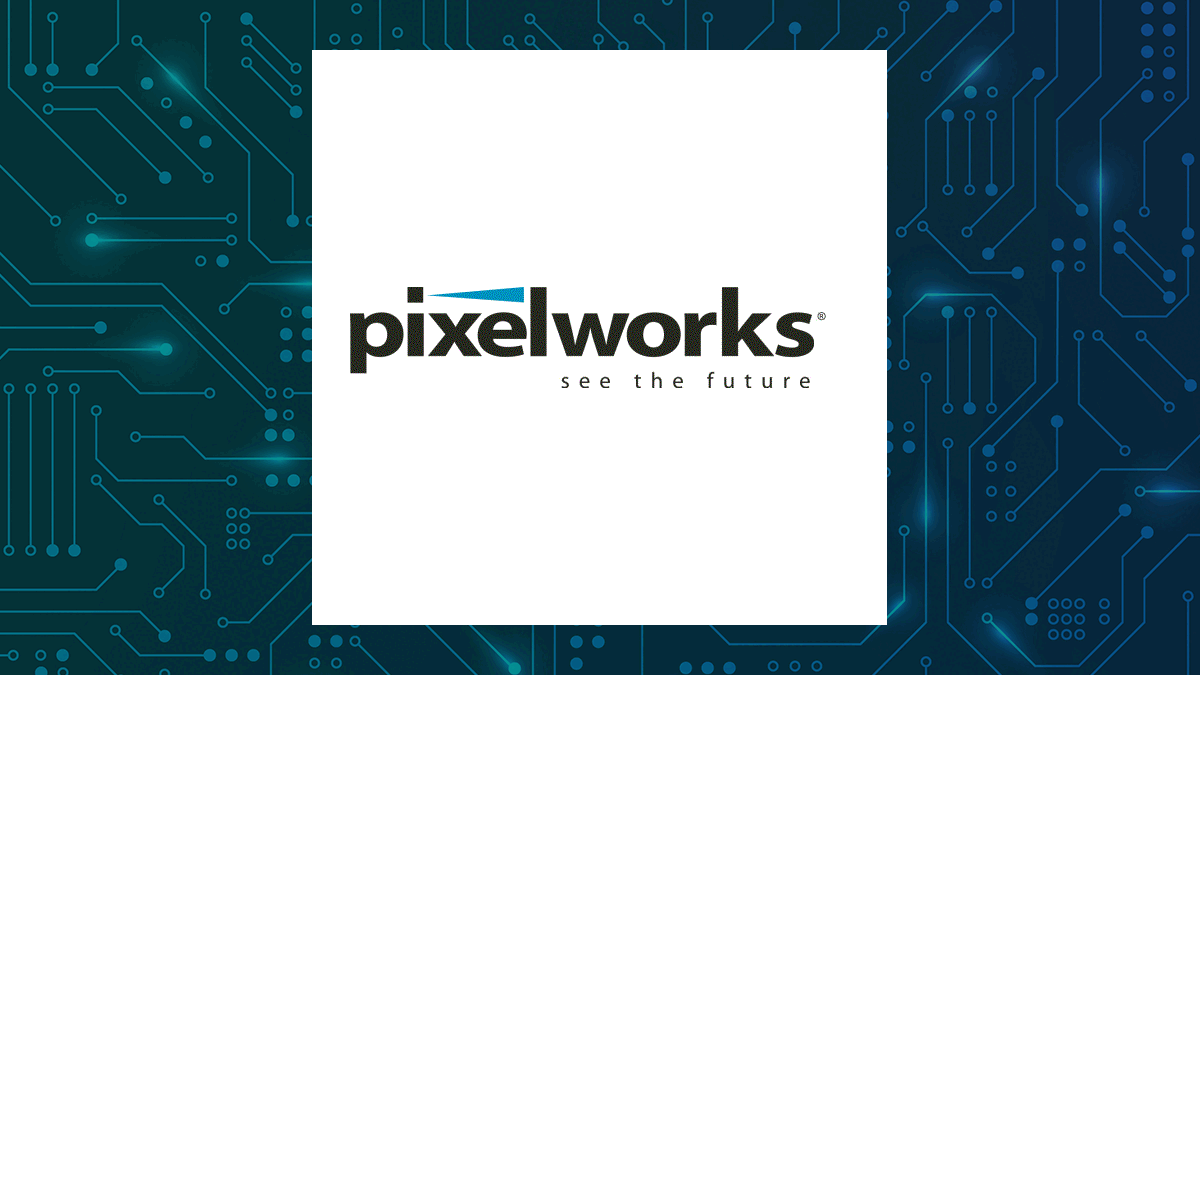 Pixelworks logo with Computer and Technology background